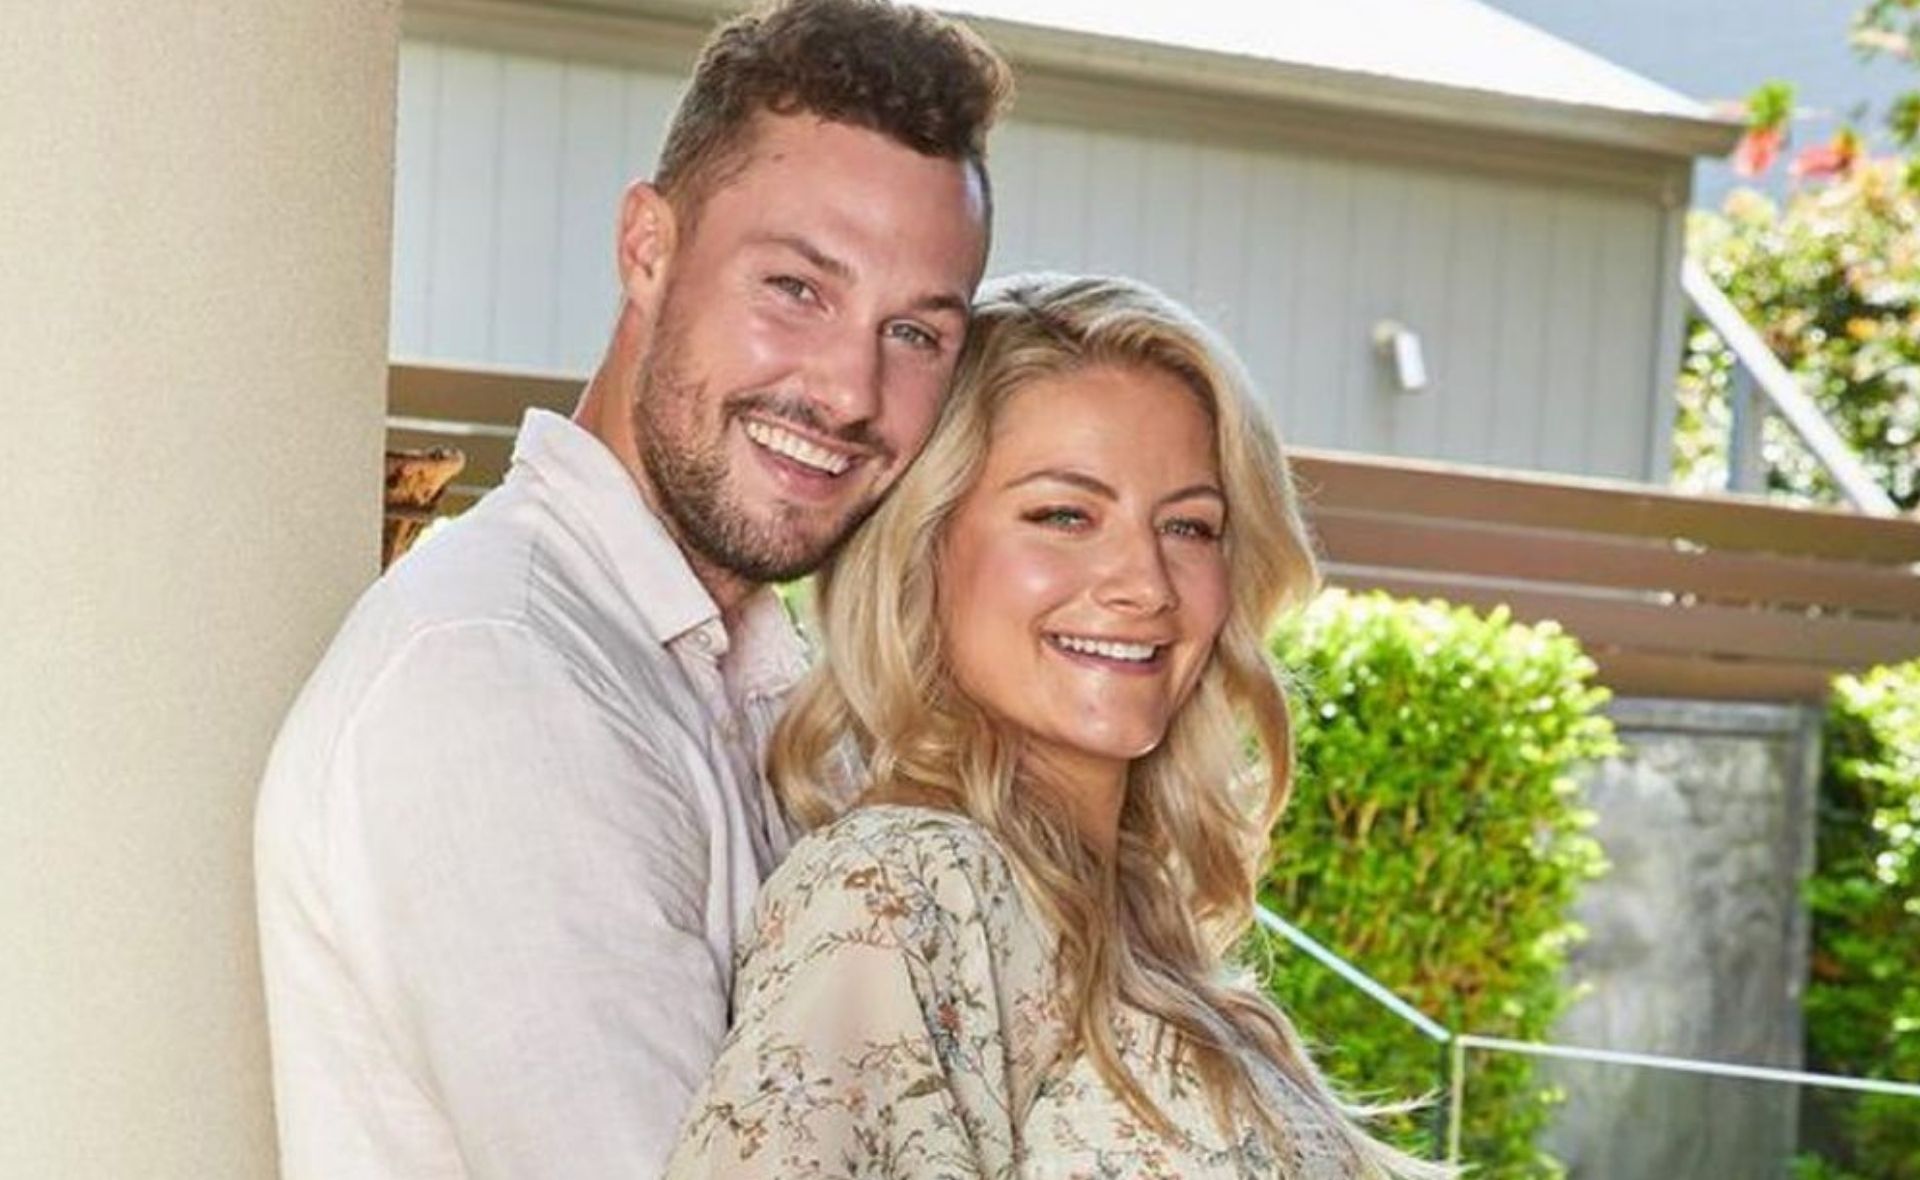 Block baby! Luke Packham and his fiancée Olivia have welcomed their first child – and she’s precious